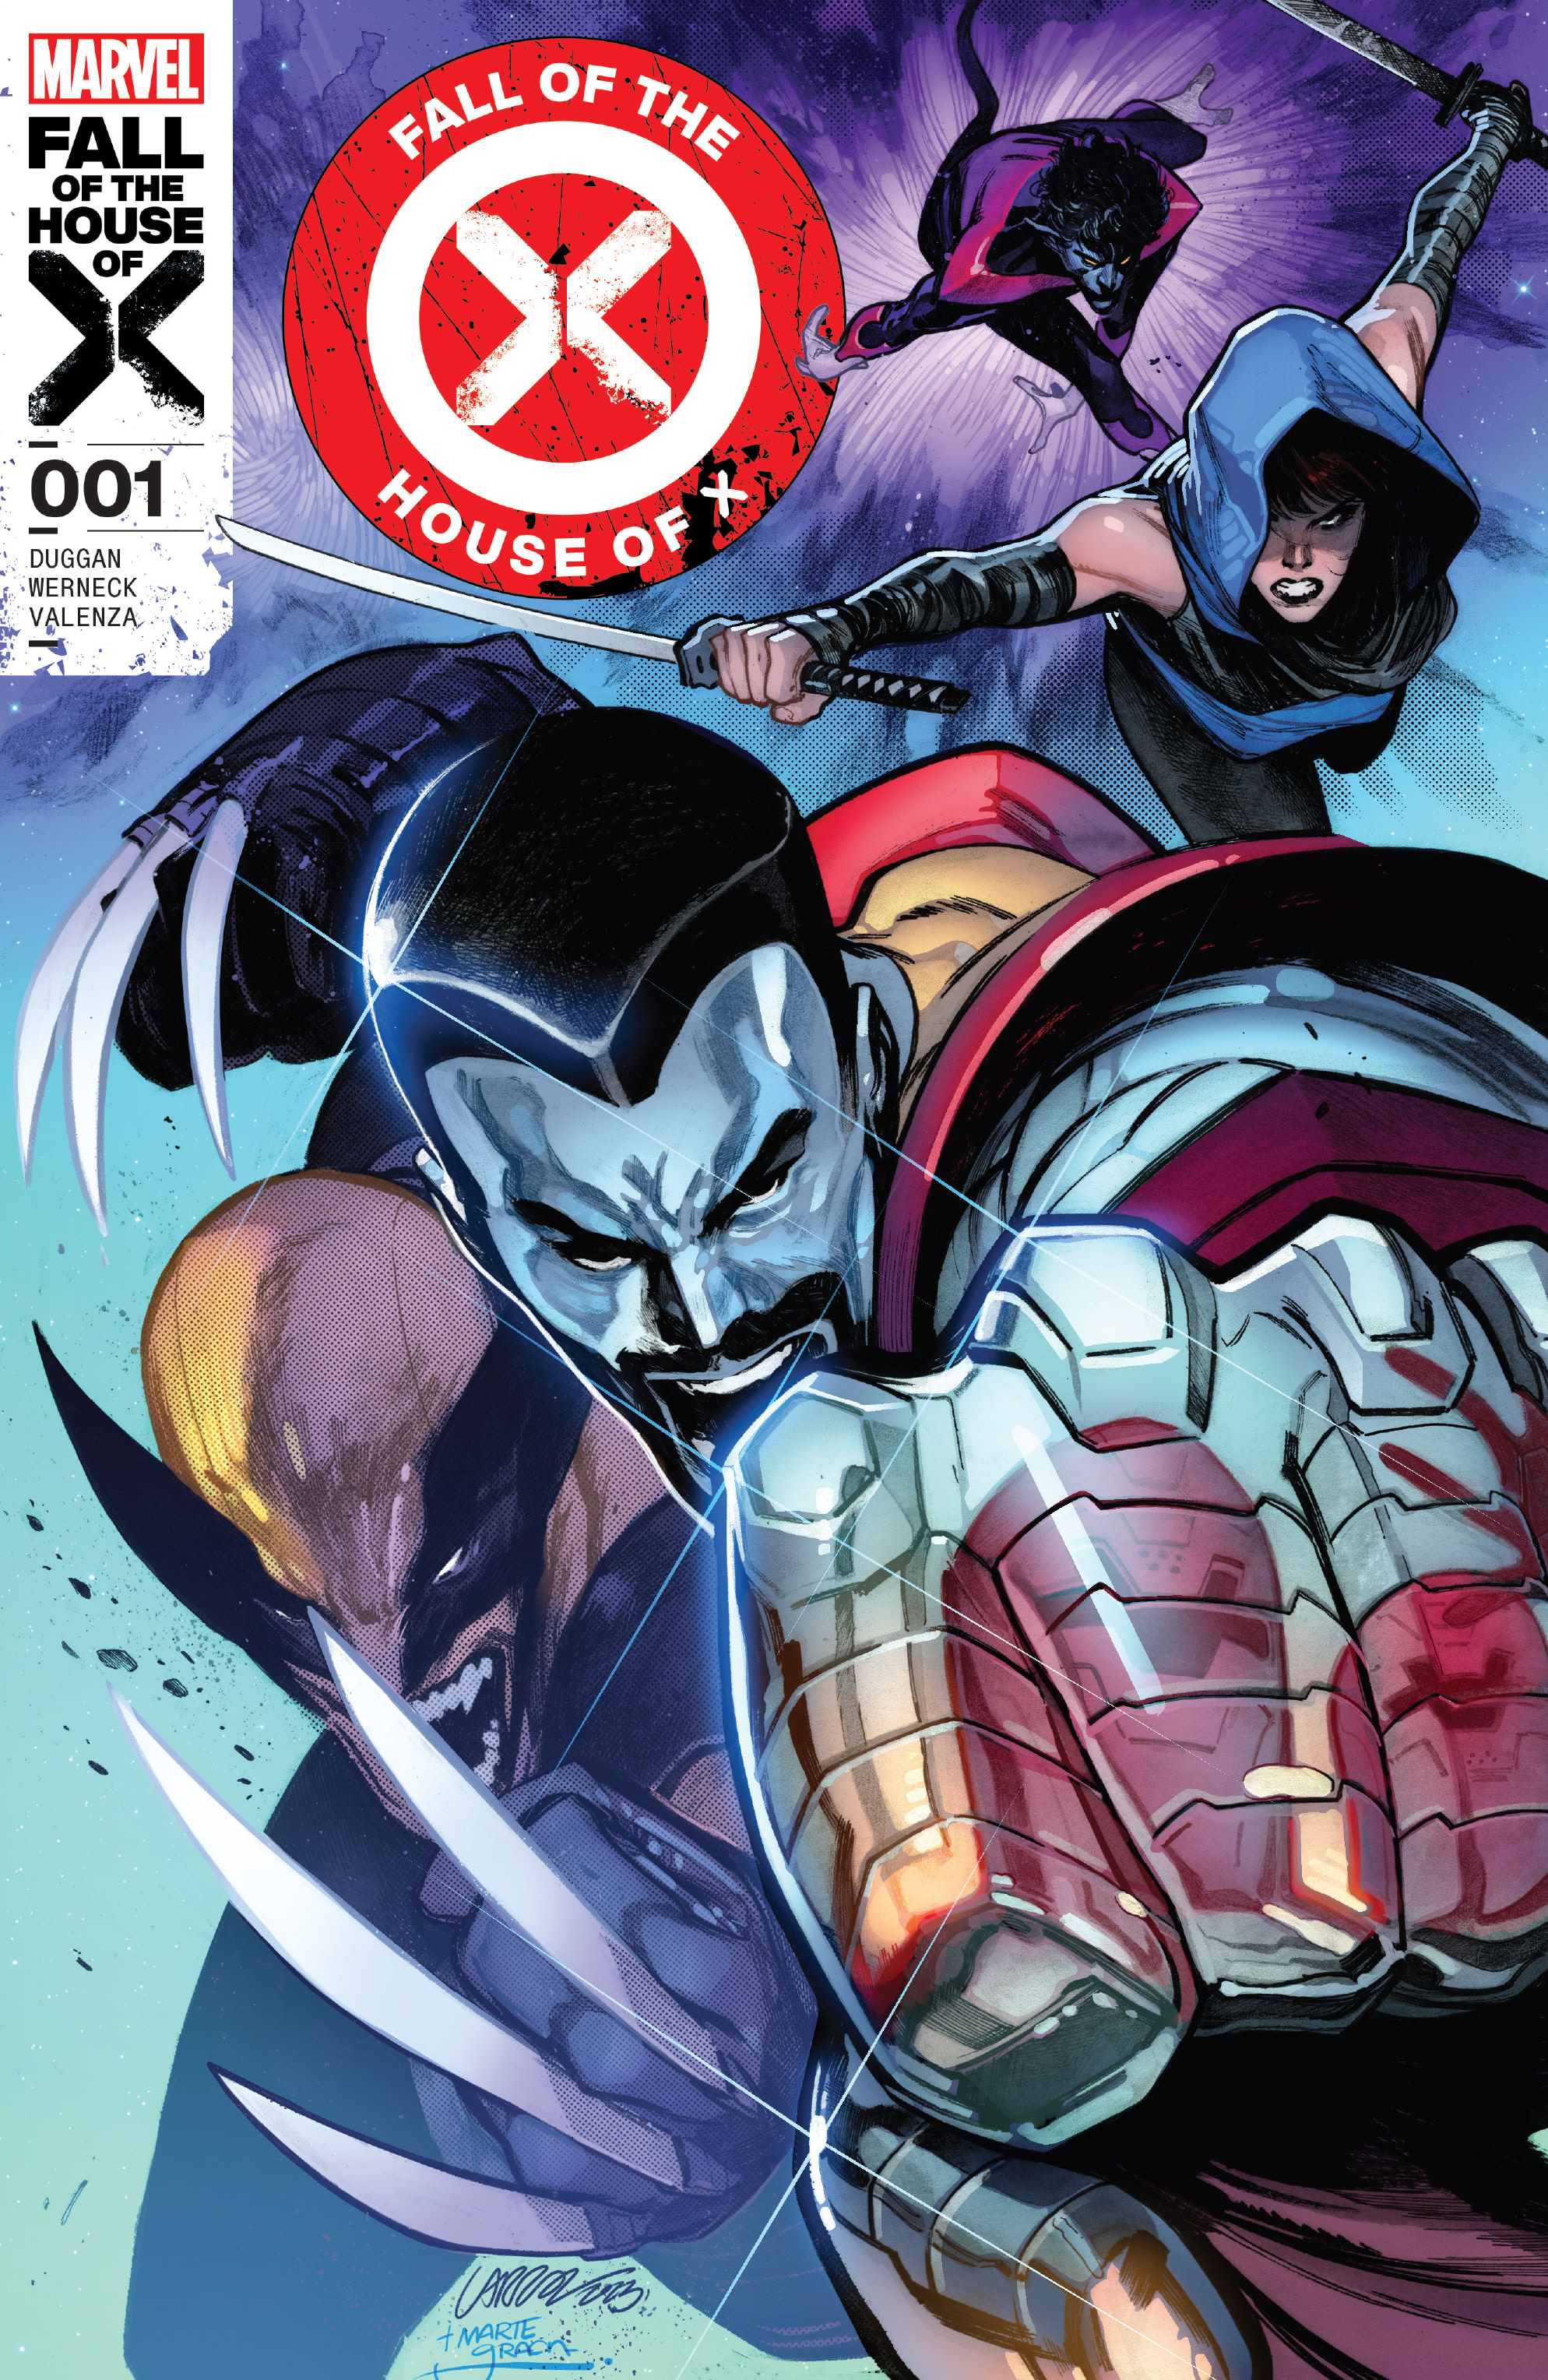 Read online Fall of the House of X comic -  Issue #1 - 1